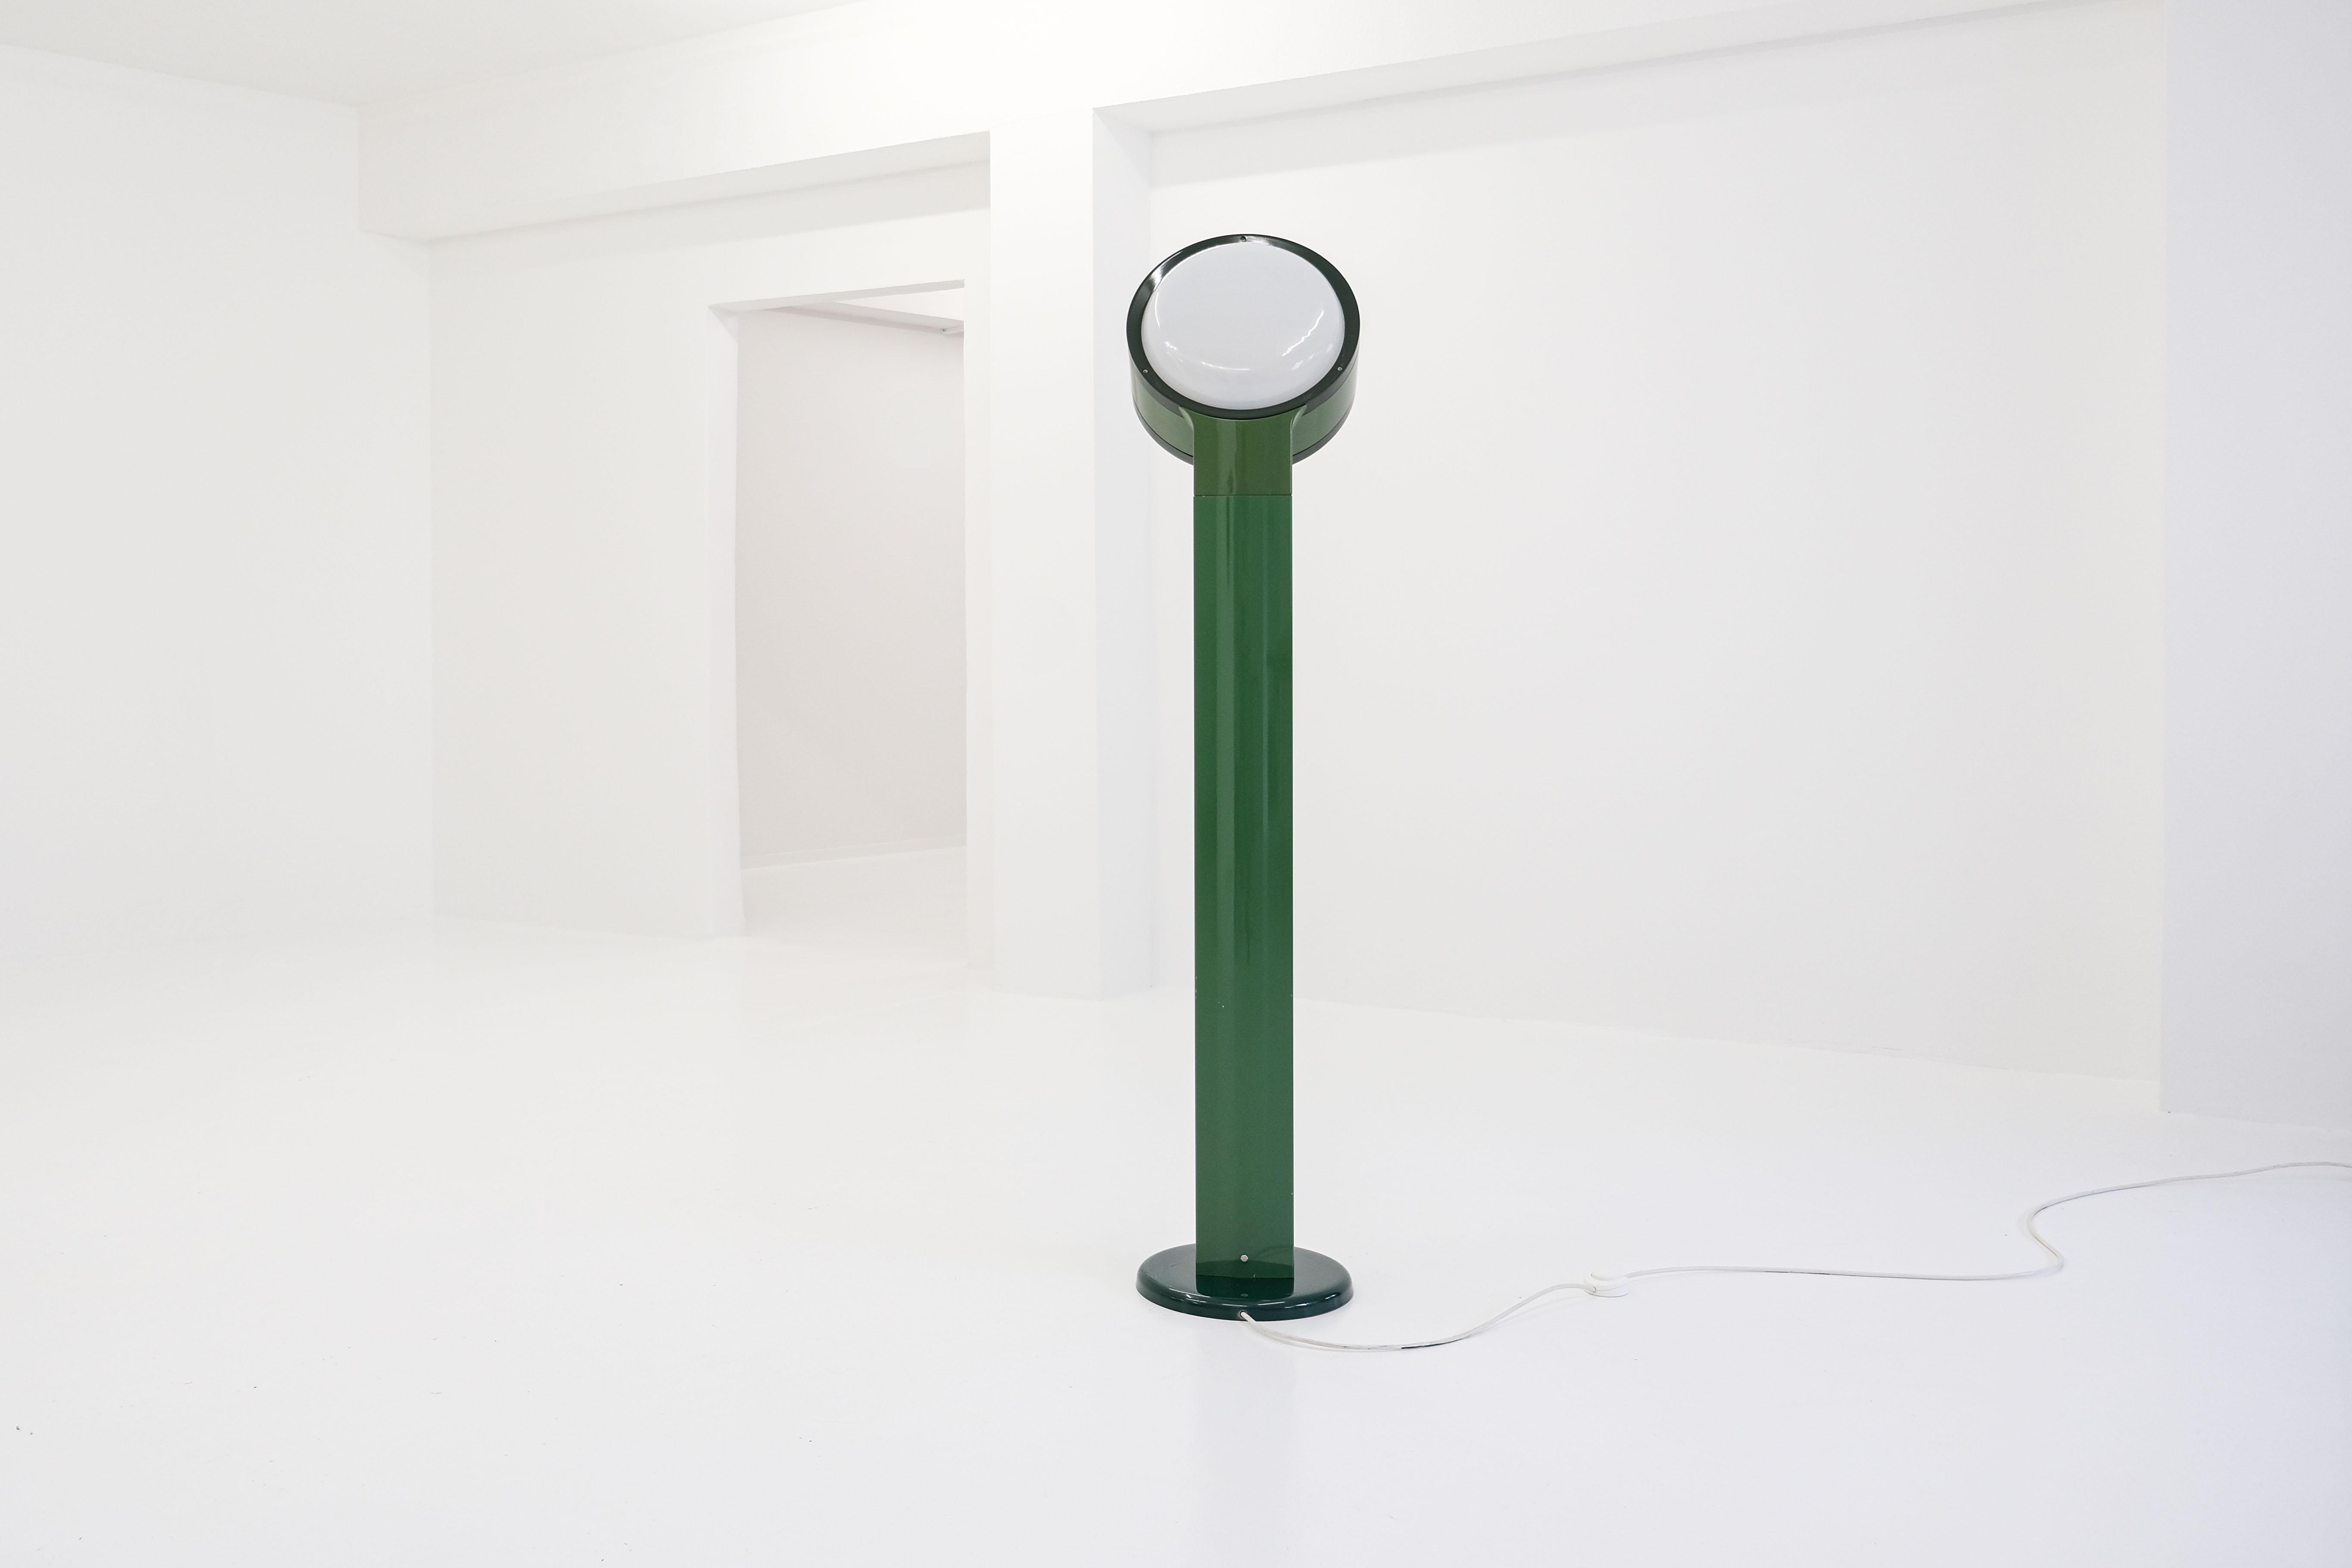 Metal Tamburo Floor Lamp by Afra & Tobia Scarpa for Flos for Inside and Outside Use